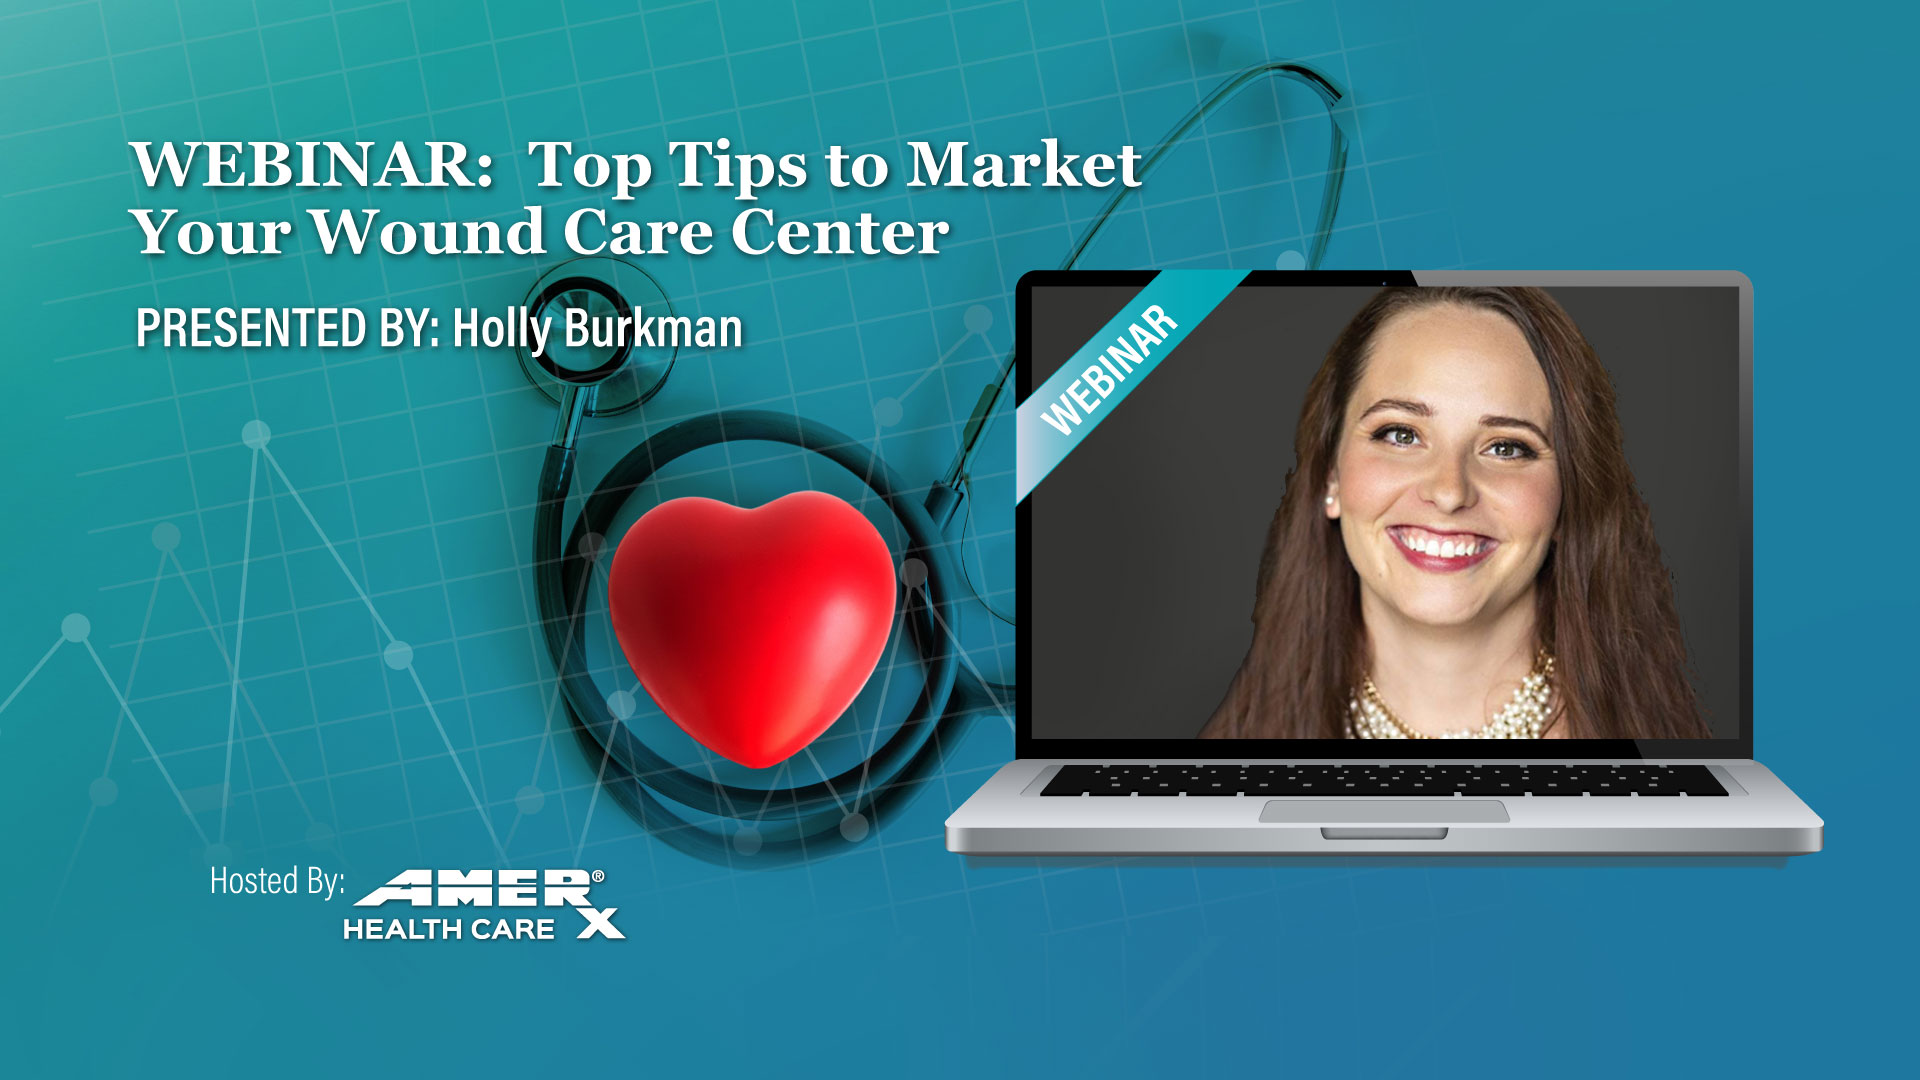 Webinar: Top Tips to Market Your Wound Care Center